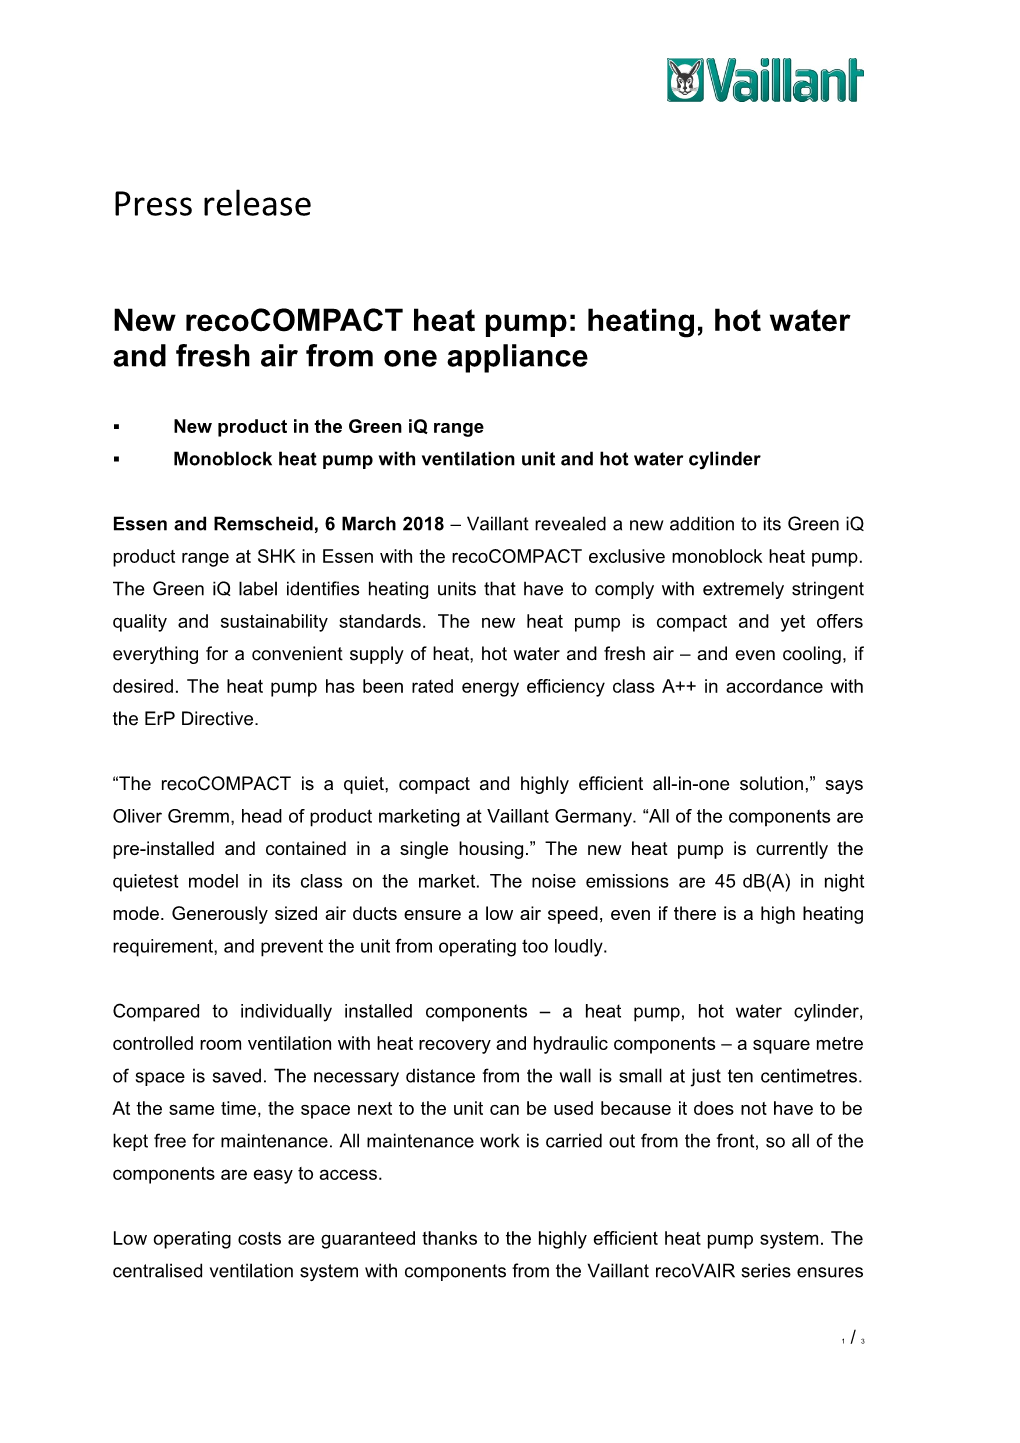 New Recocompact Heat Pump: Heating, Hot Water and Fresh Air from One Appliance